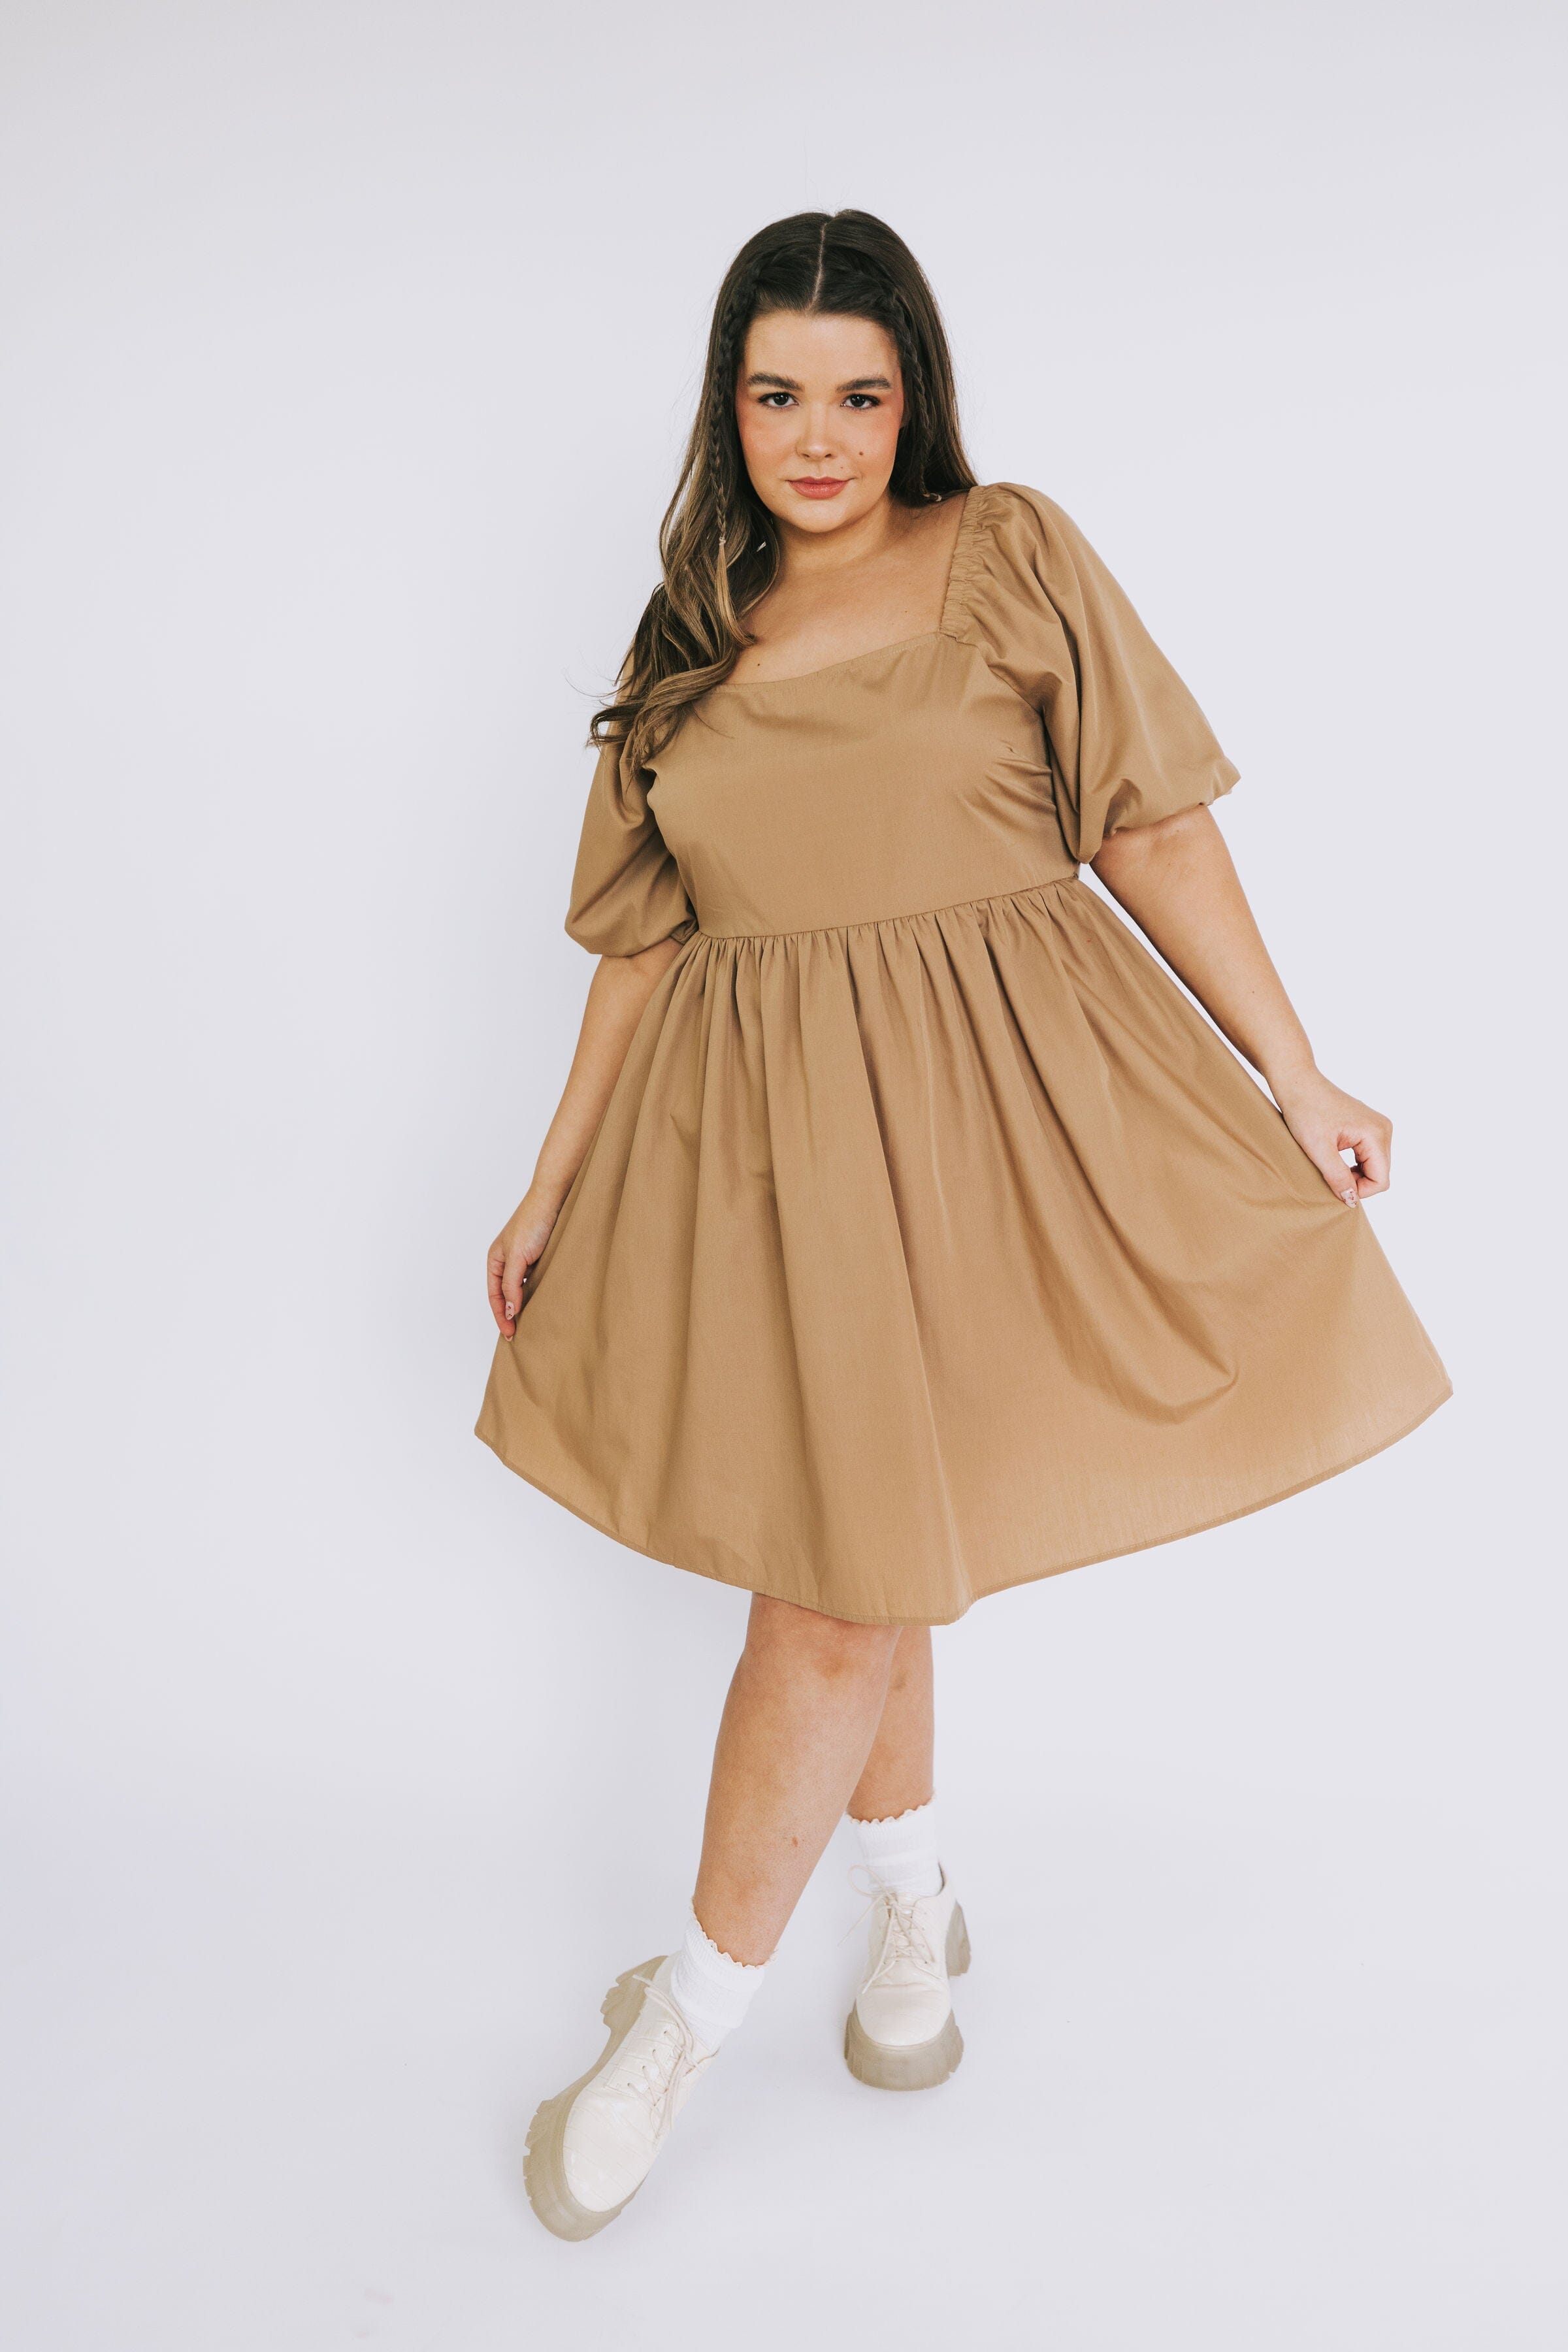 PLUS SIZE - Say It First Dress